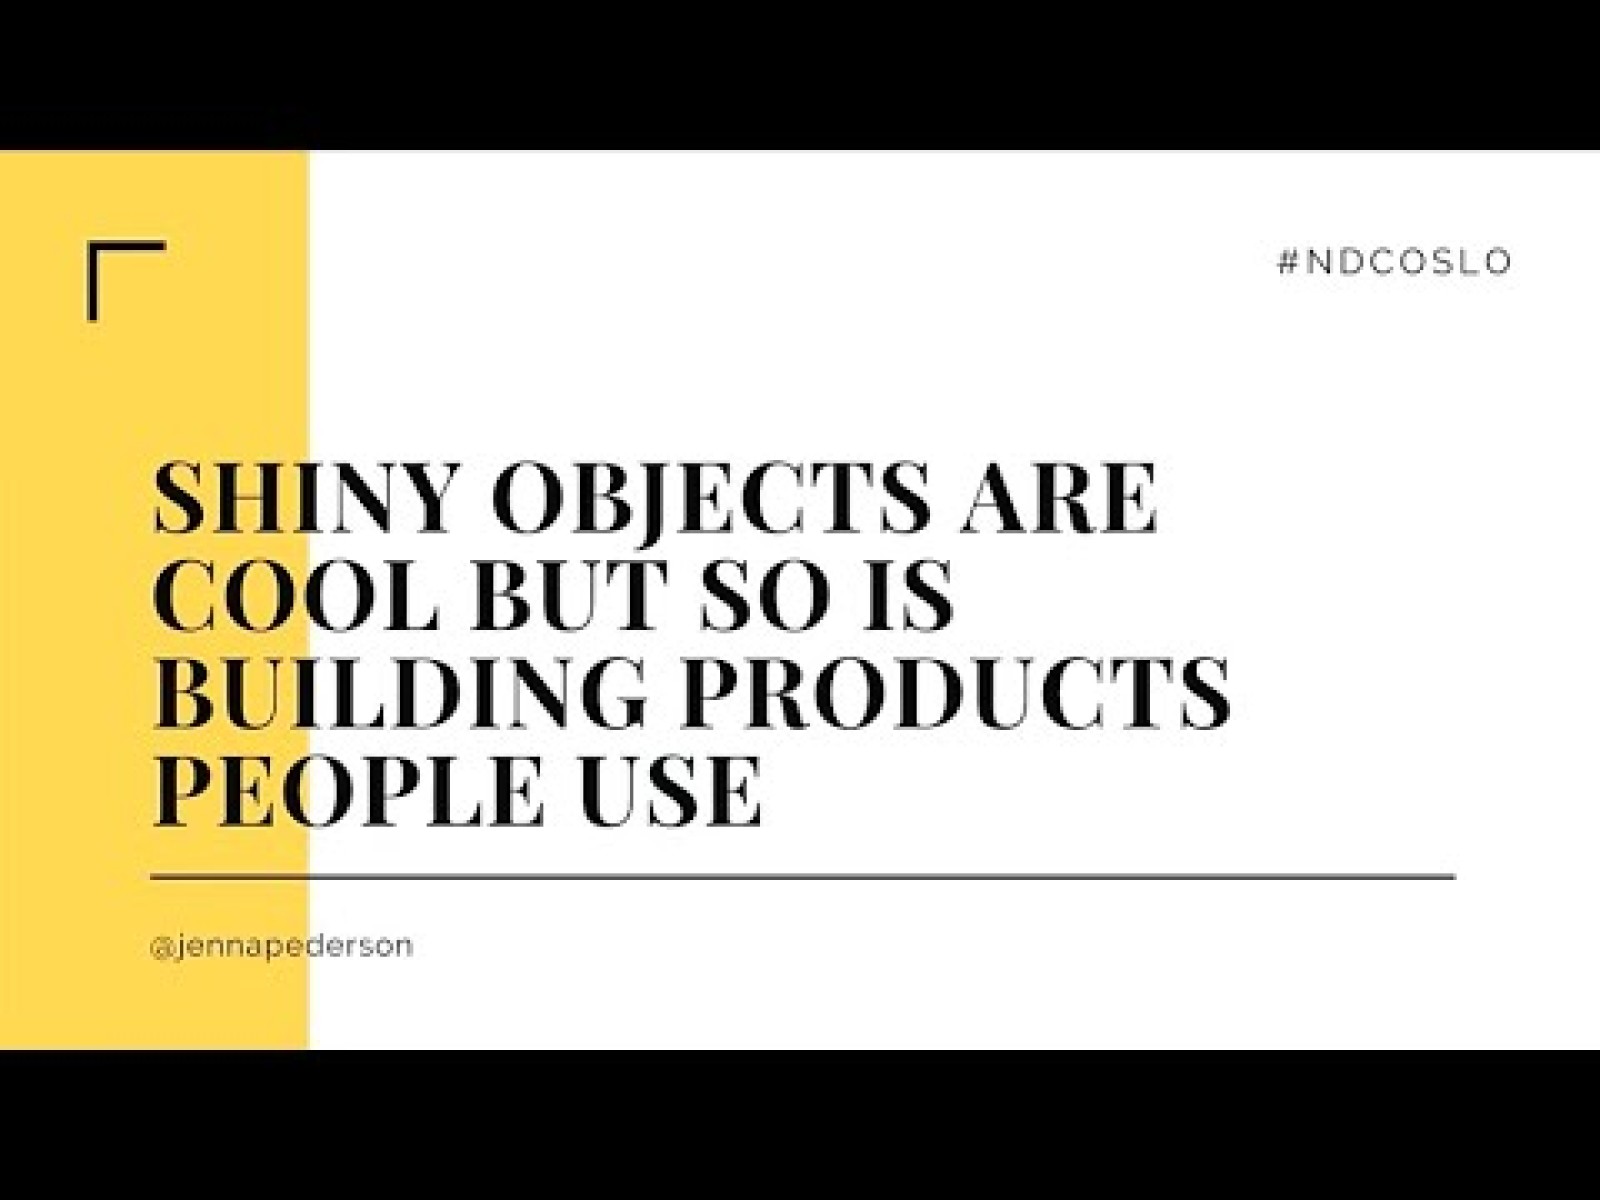 Shiny objects are cool, but so is building products people use